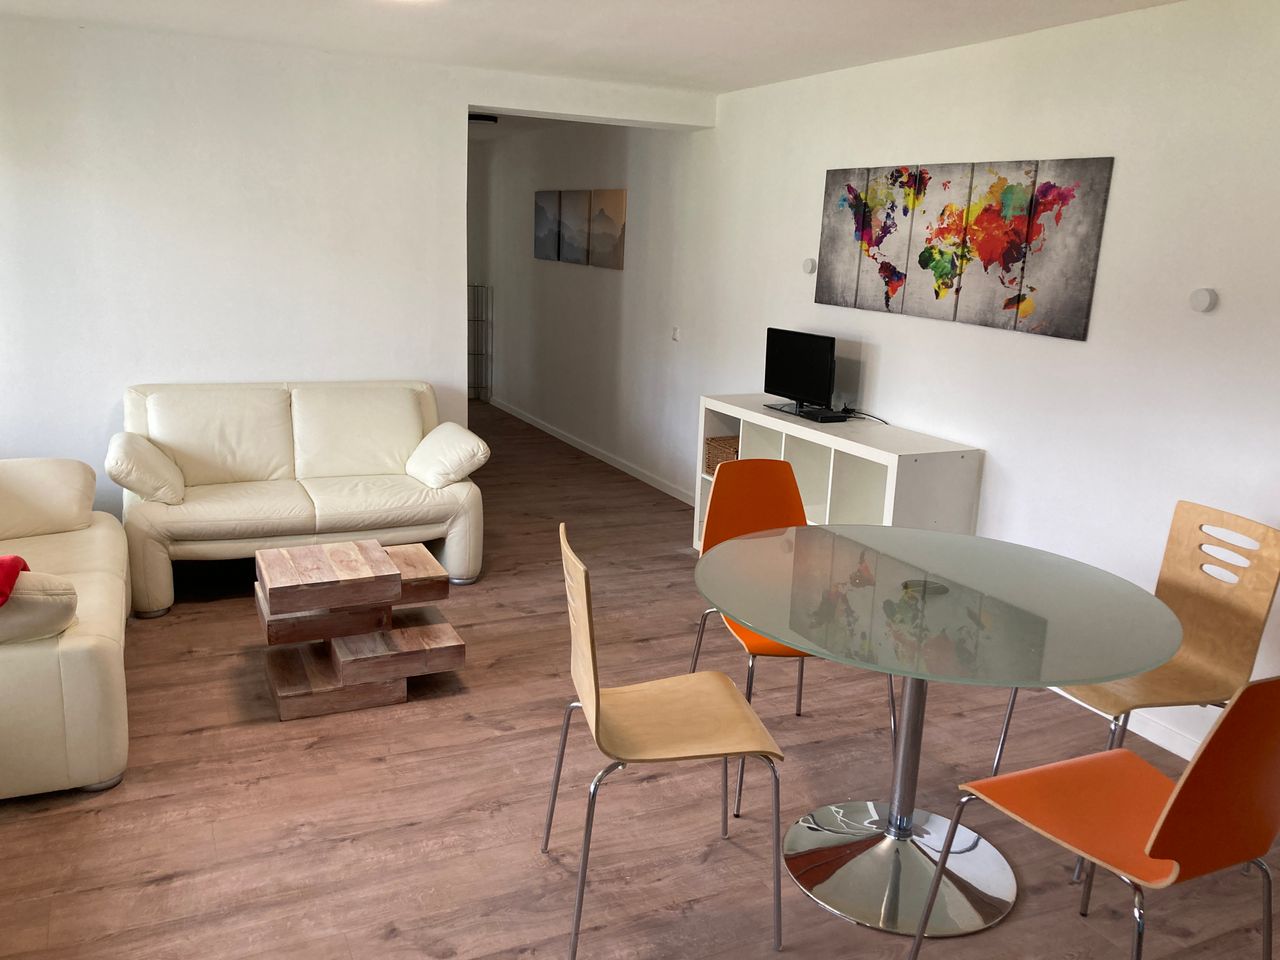 Spacious and fashionable apartment with a private terrace and garden, close to the city center